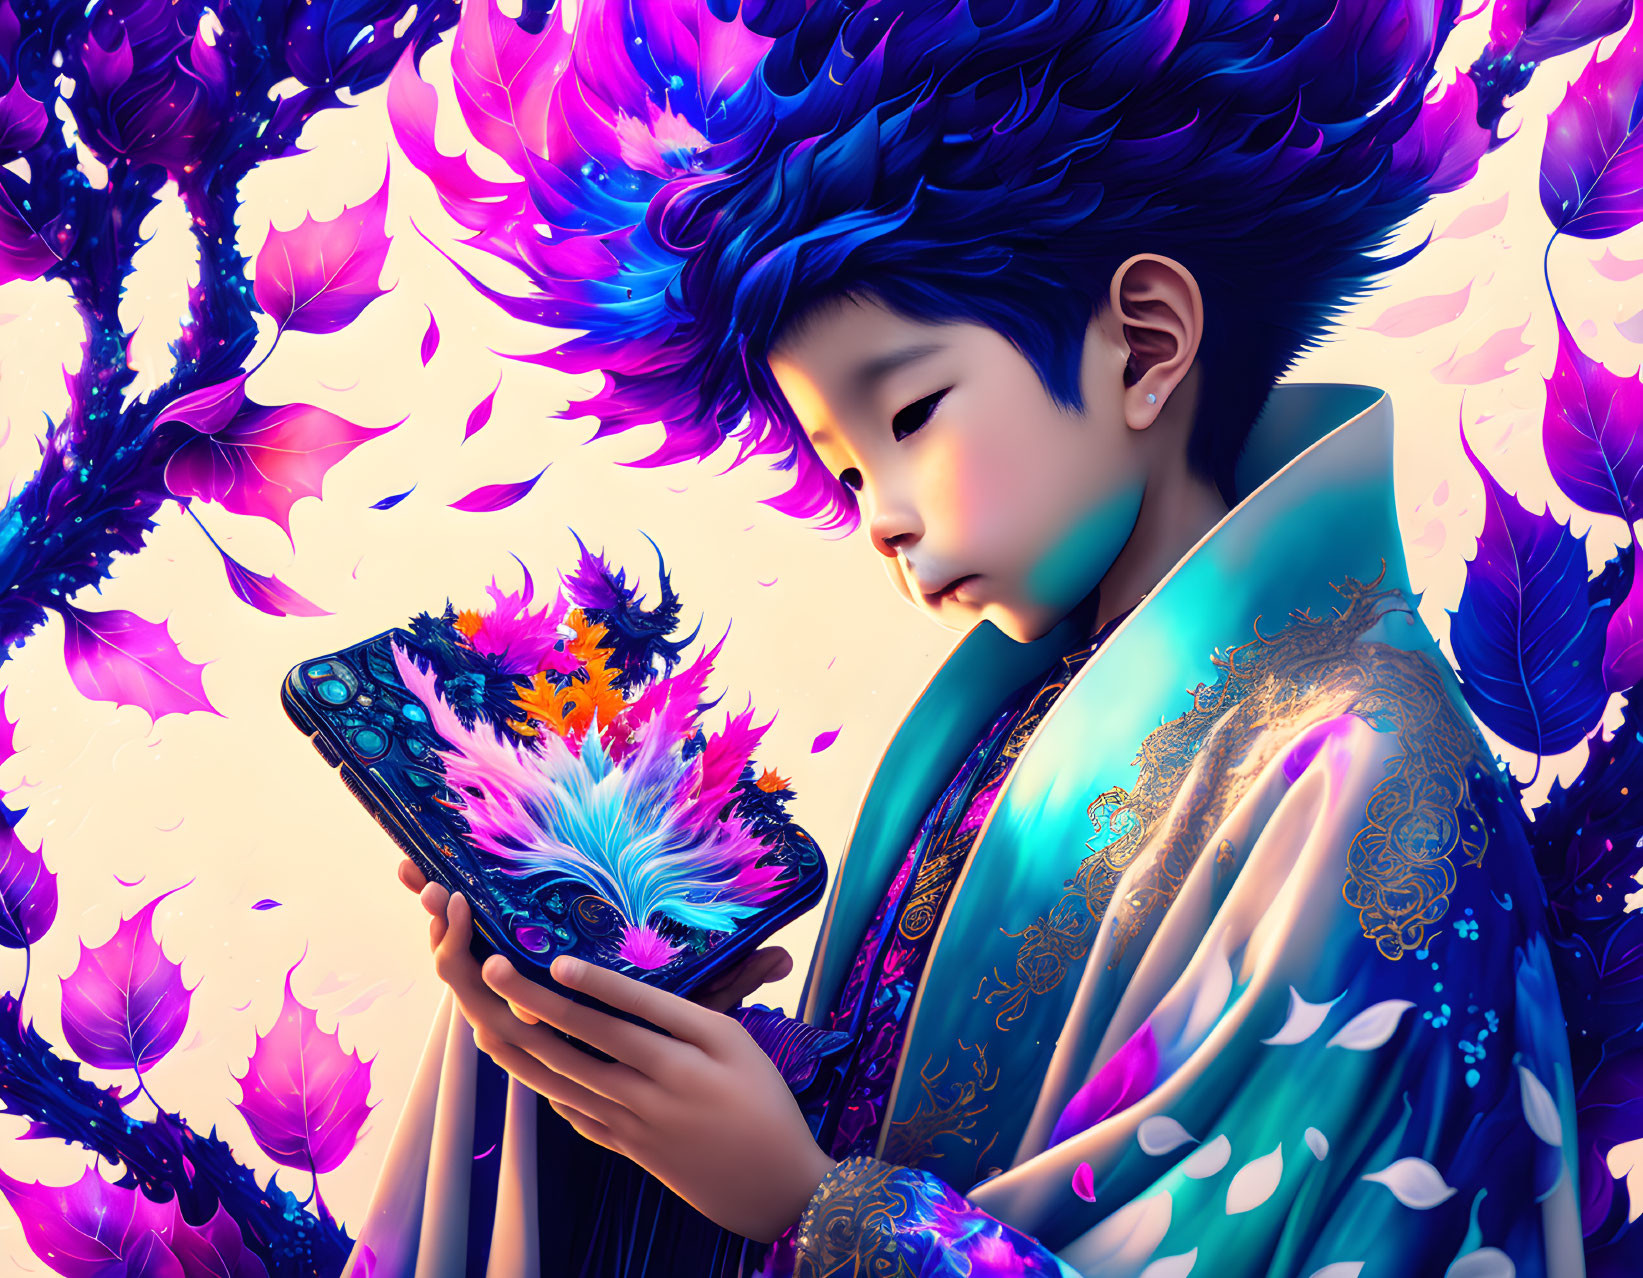 Illustration of child in traditional attire with glowing tablet and magical flora